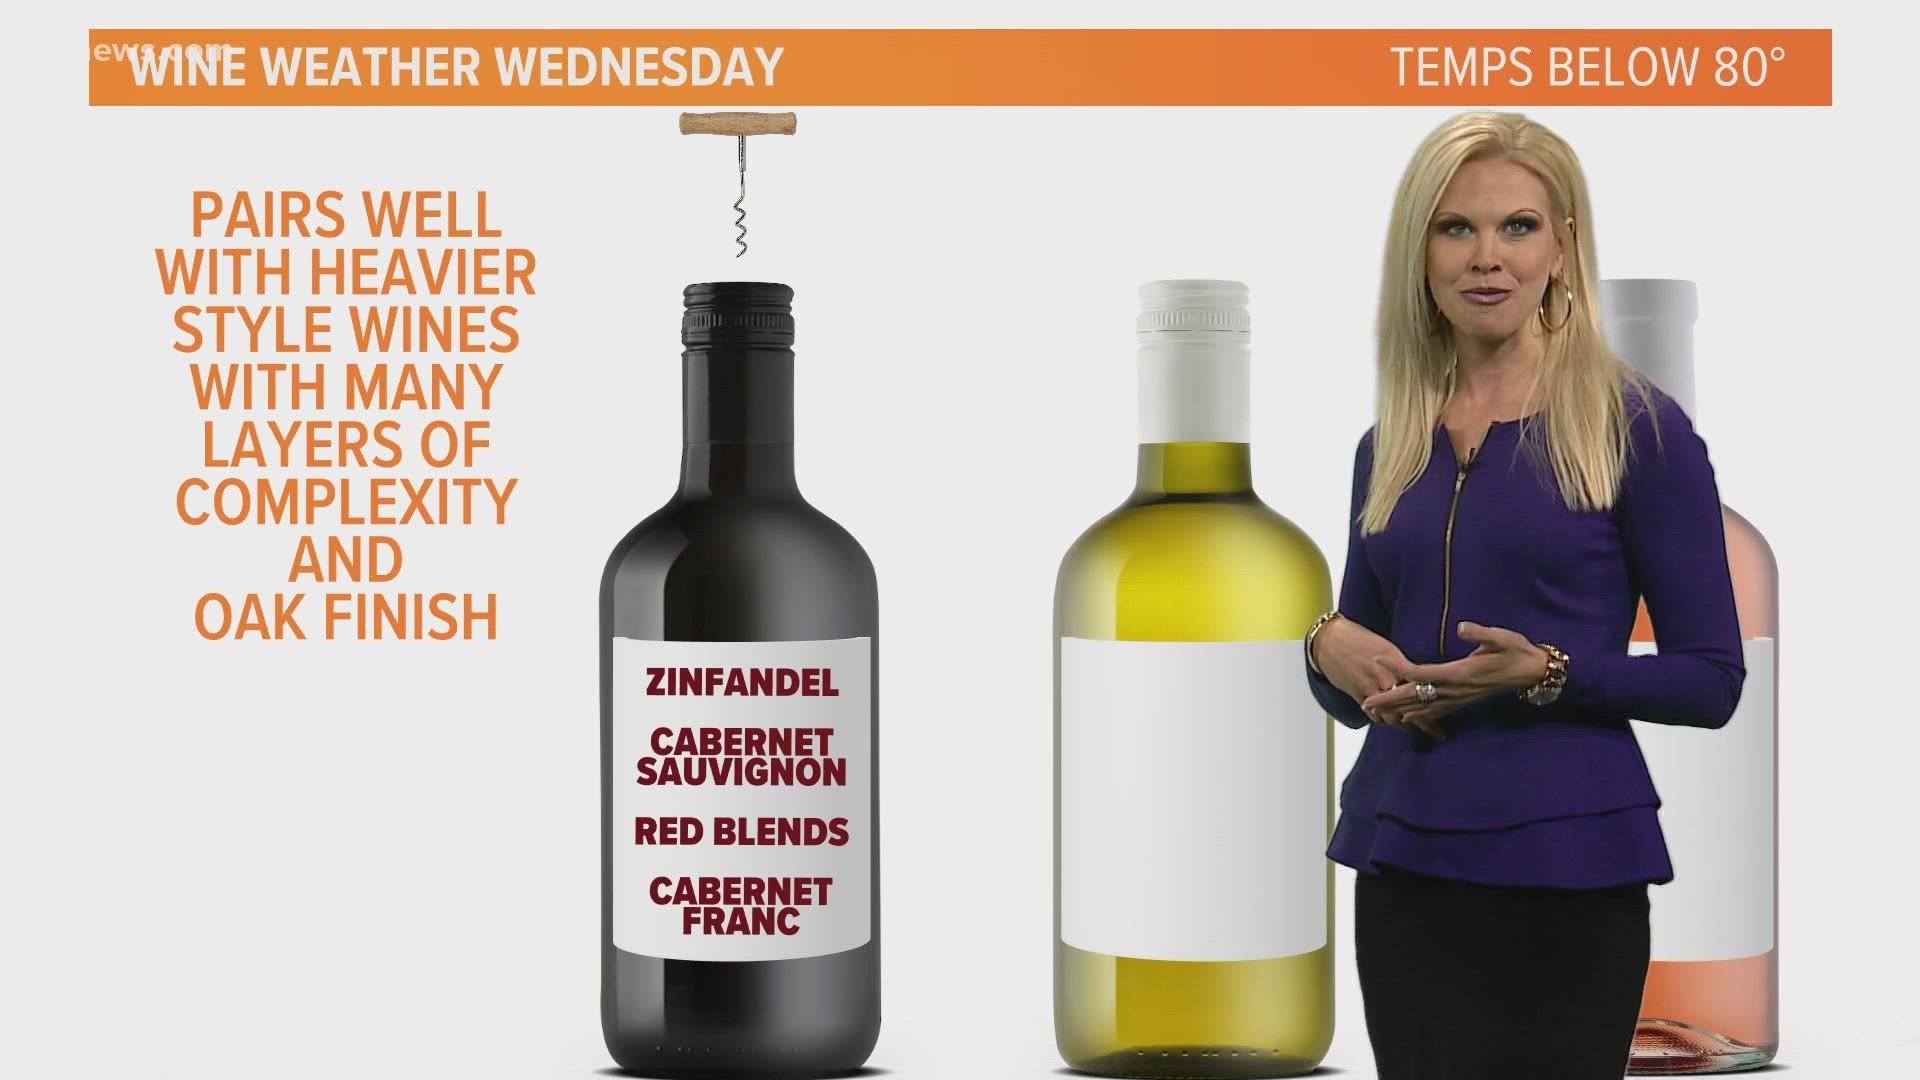 It's National American Beer Day! More of a wine drinker? Here is the best pairing for today's weather.